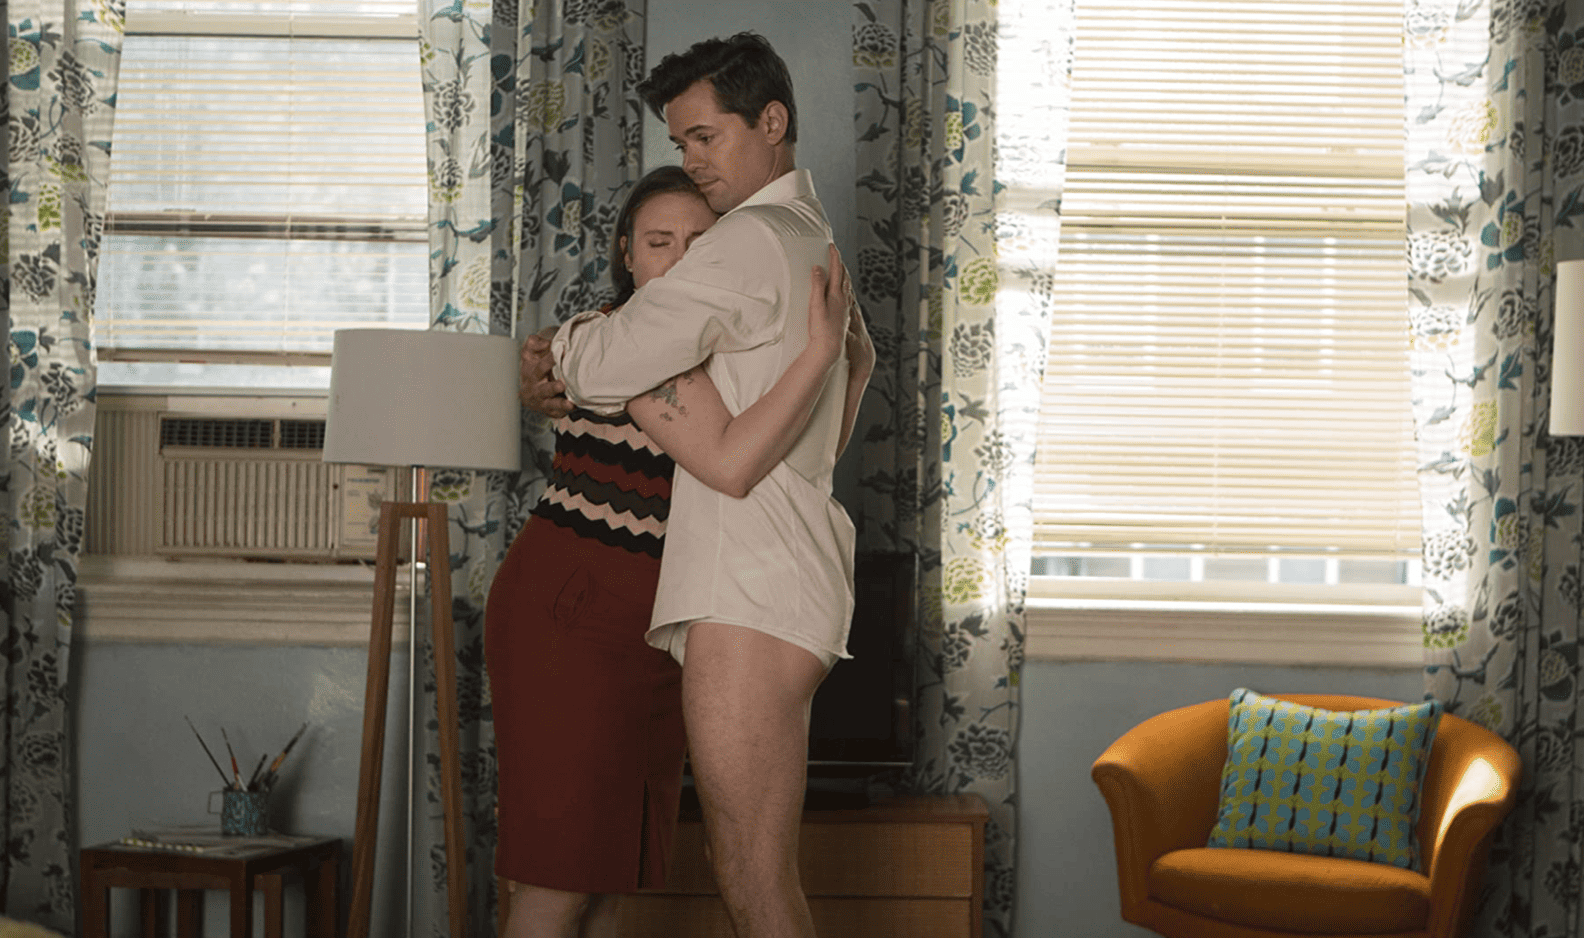 Hannah and Elijah embrace in their living room in this tender image from Apatow Productions